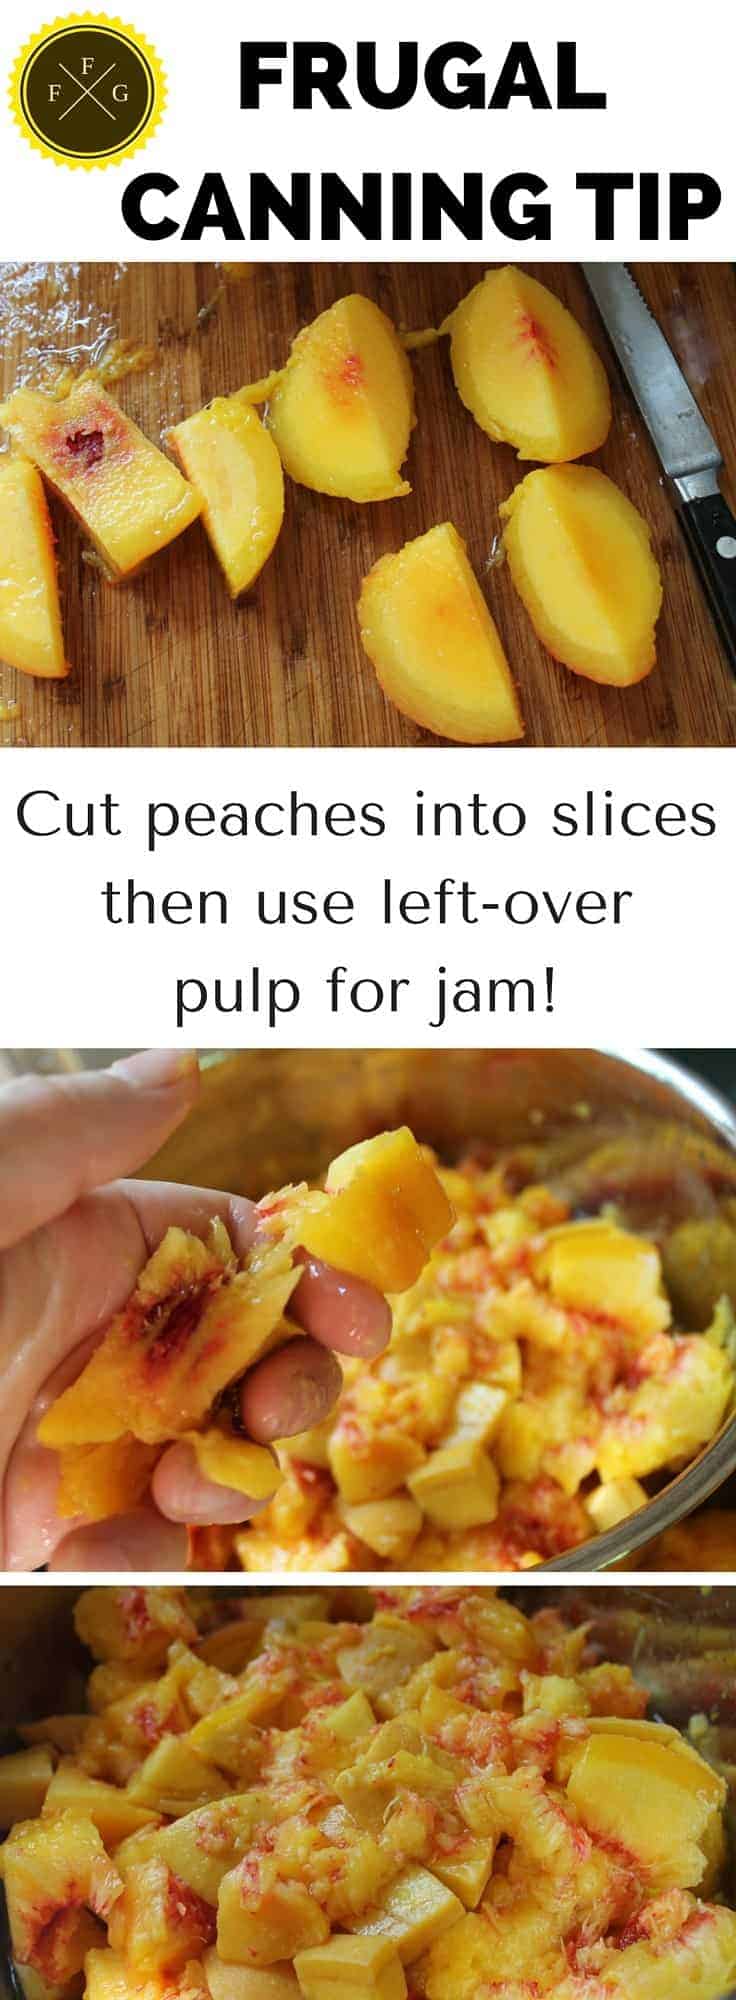 Frugal jam making tips when canning peaches